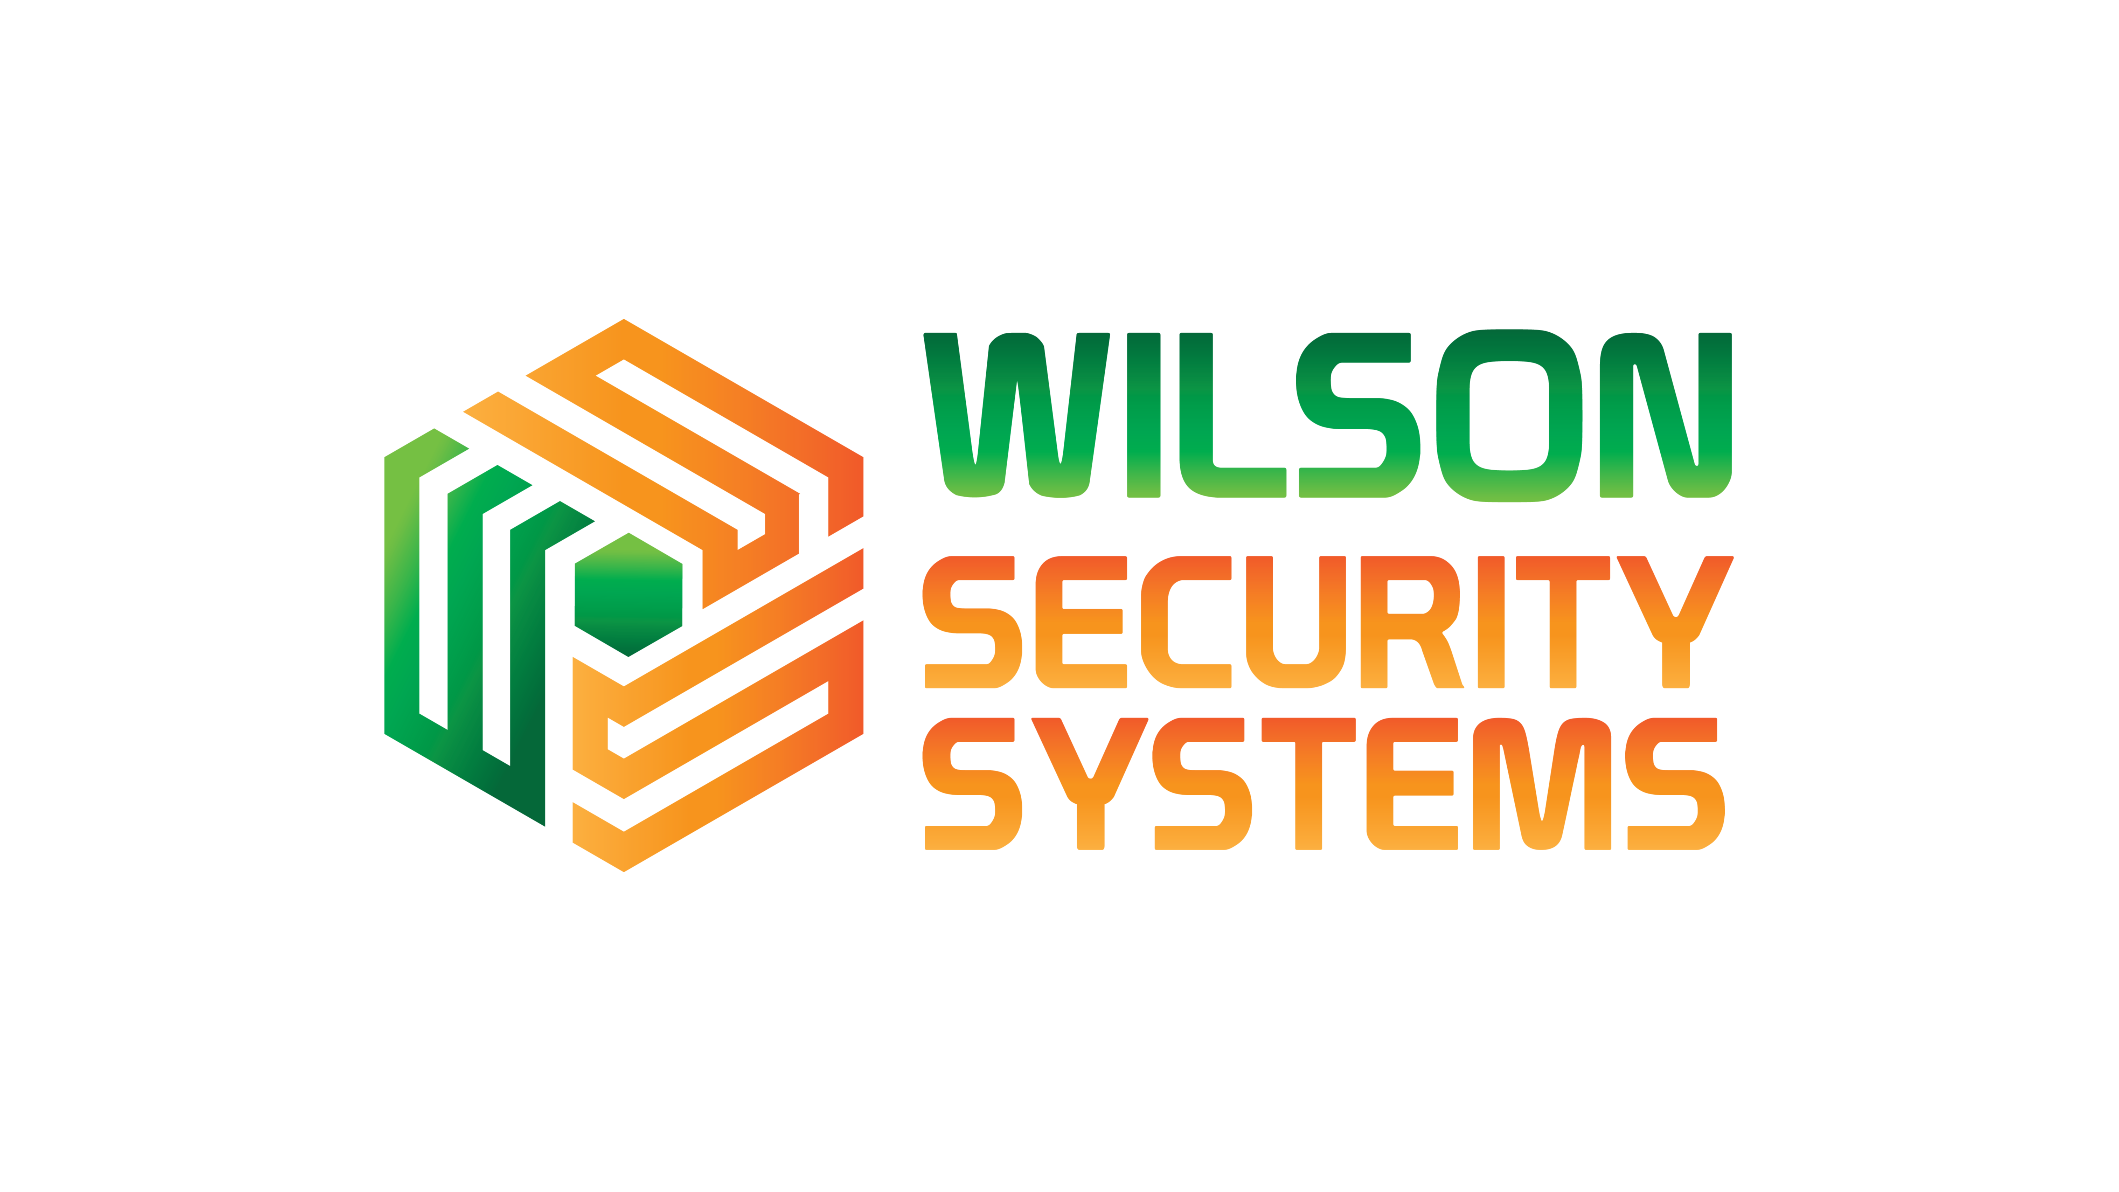 Images Wilson Security Systems Ltd.